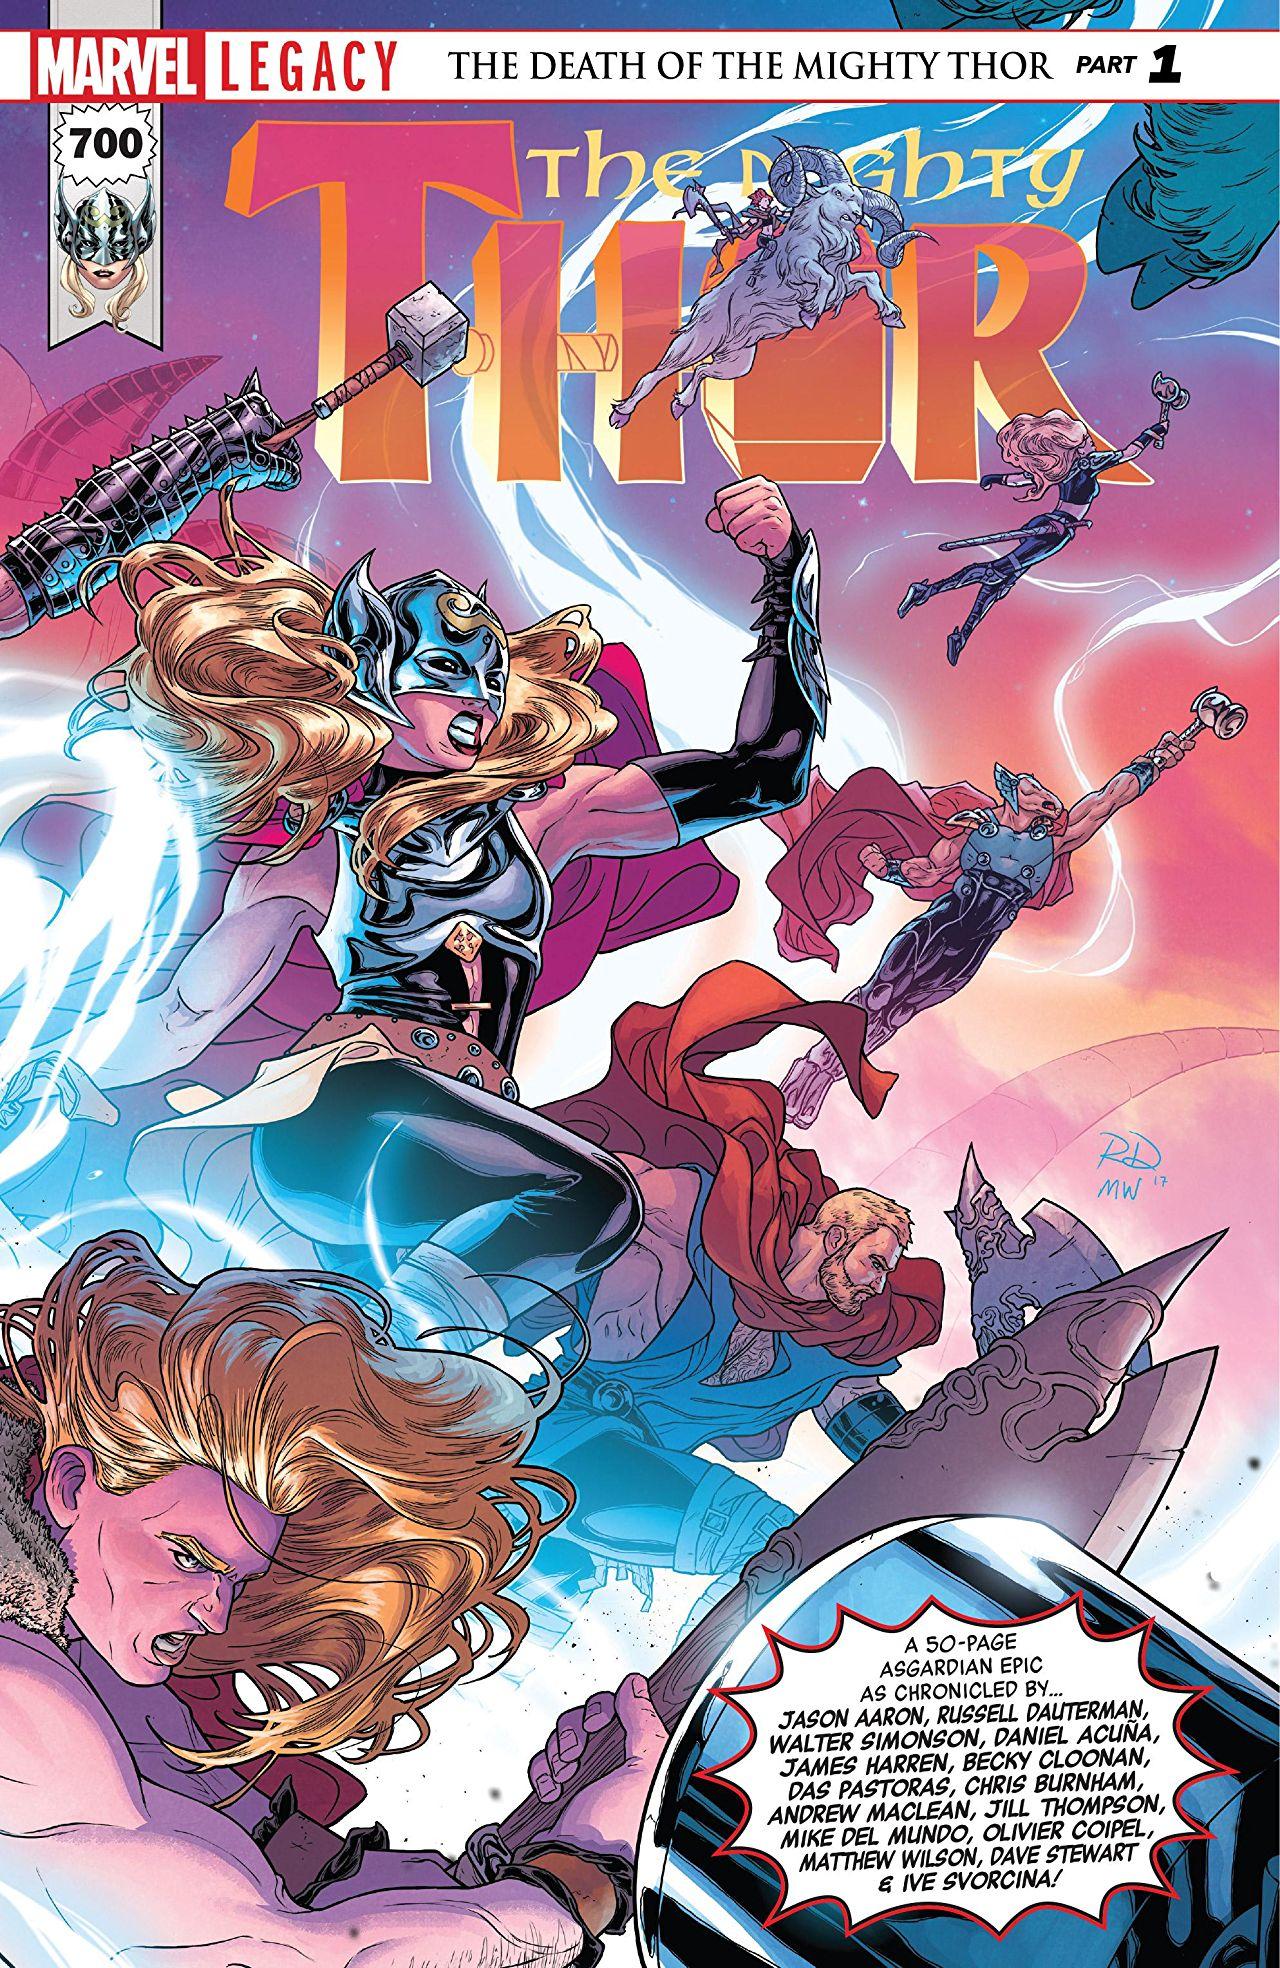 The Mighty Thor Vol. 1 #700